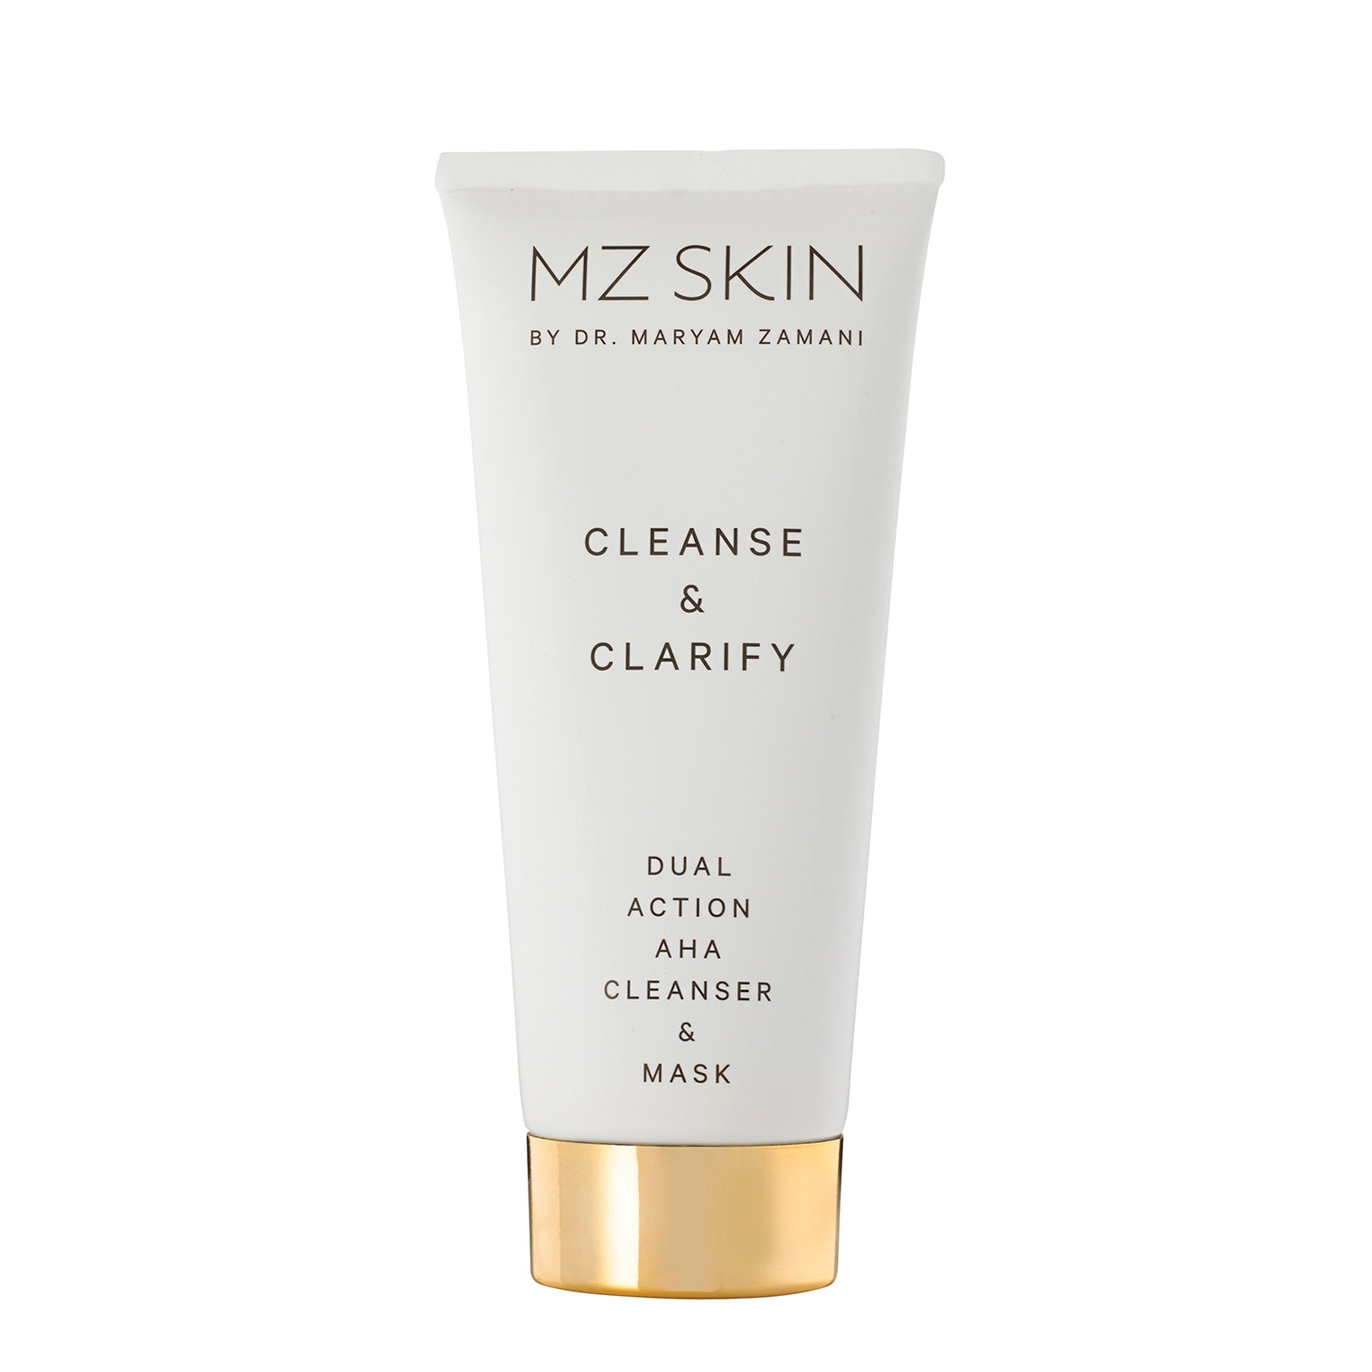 Cleanse & Clarify Dual Action Aha Cleanser & Mask 100ml